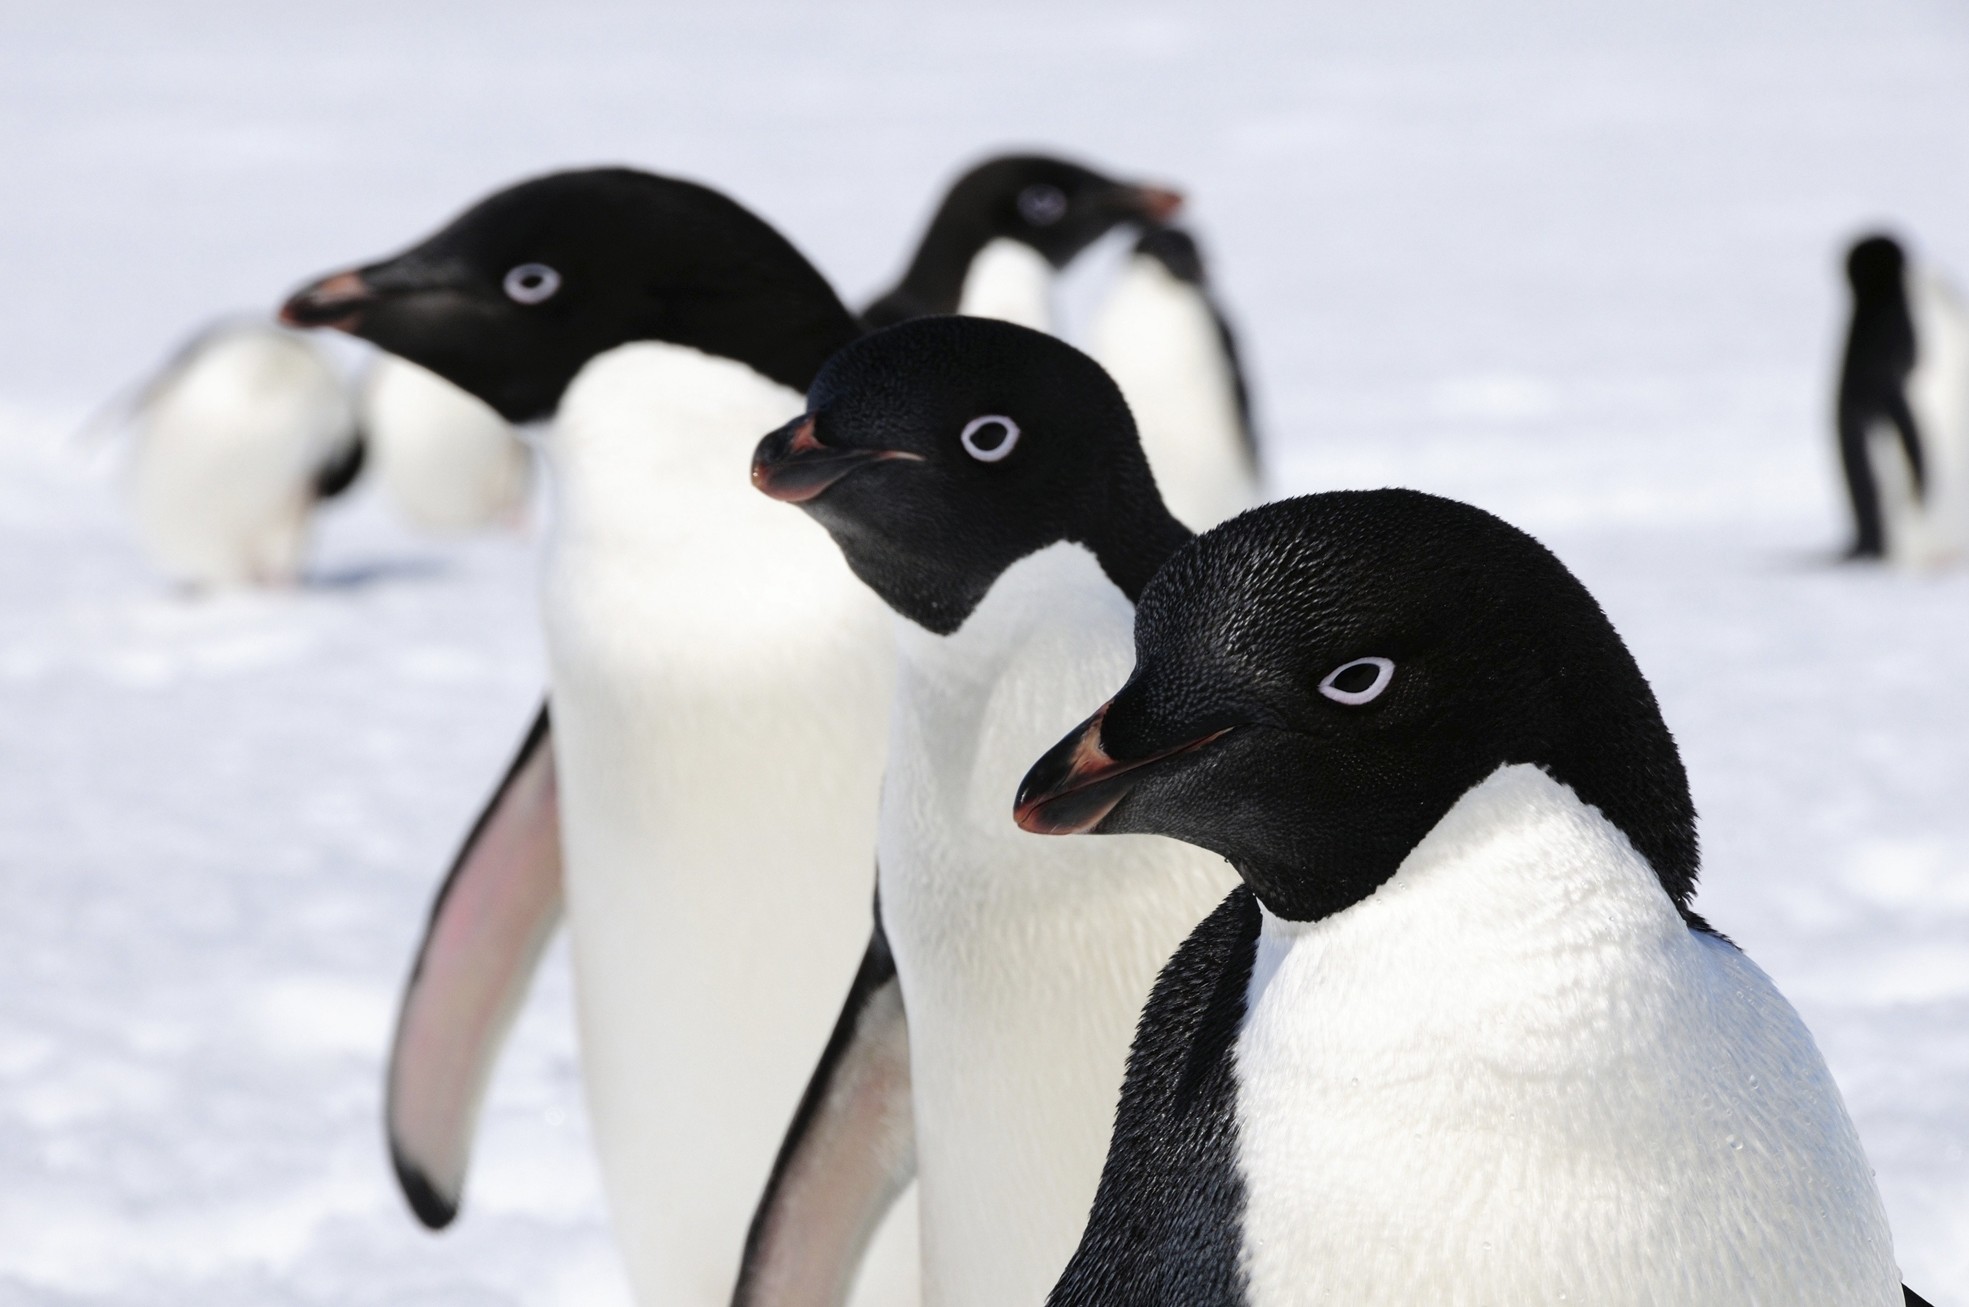 Global researchers have revised previous population estimates of East Antarcticau2019s Adelie penguins, with new data showing a doubling to almost 6 million of the birds, suggesting global numbers are pushing 16 million.